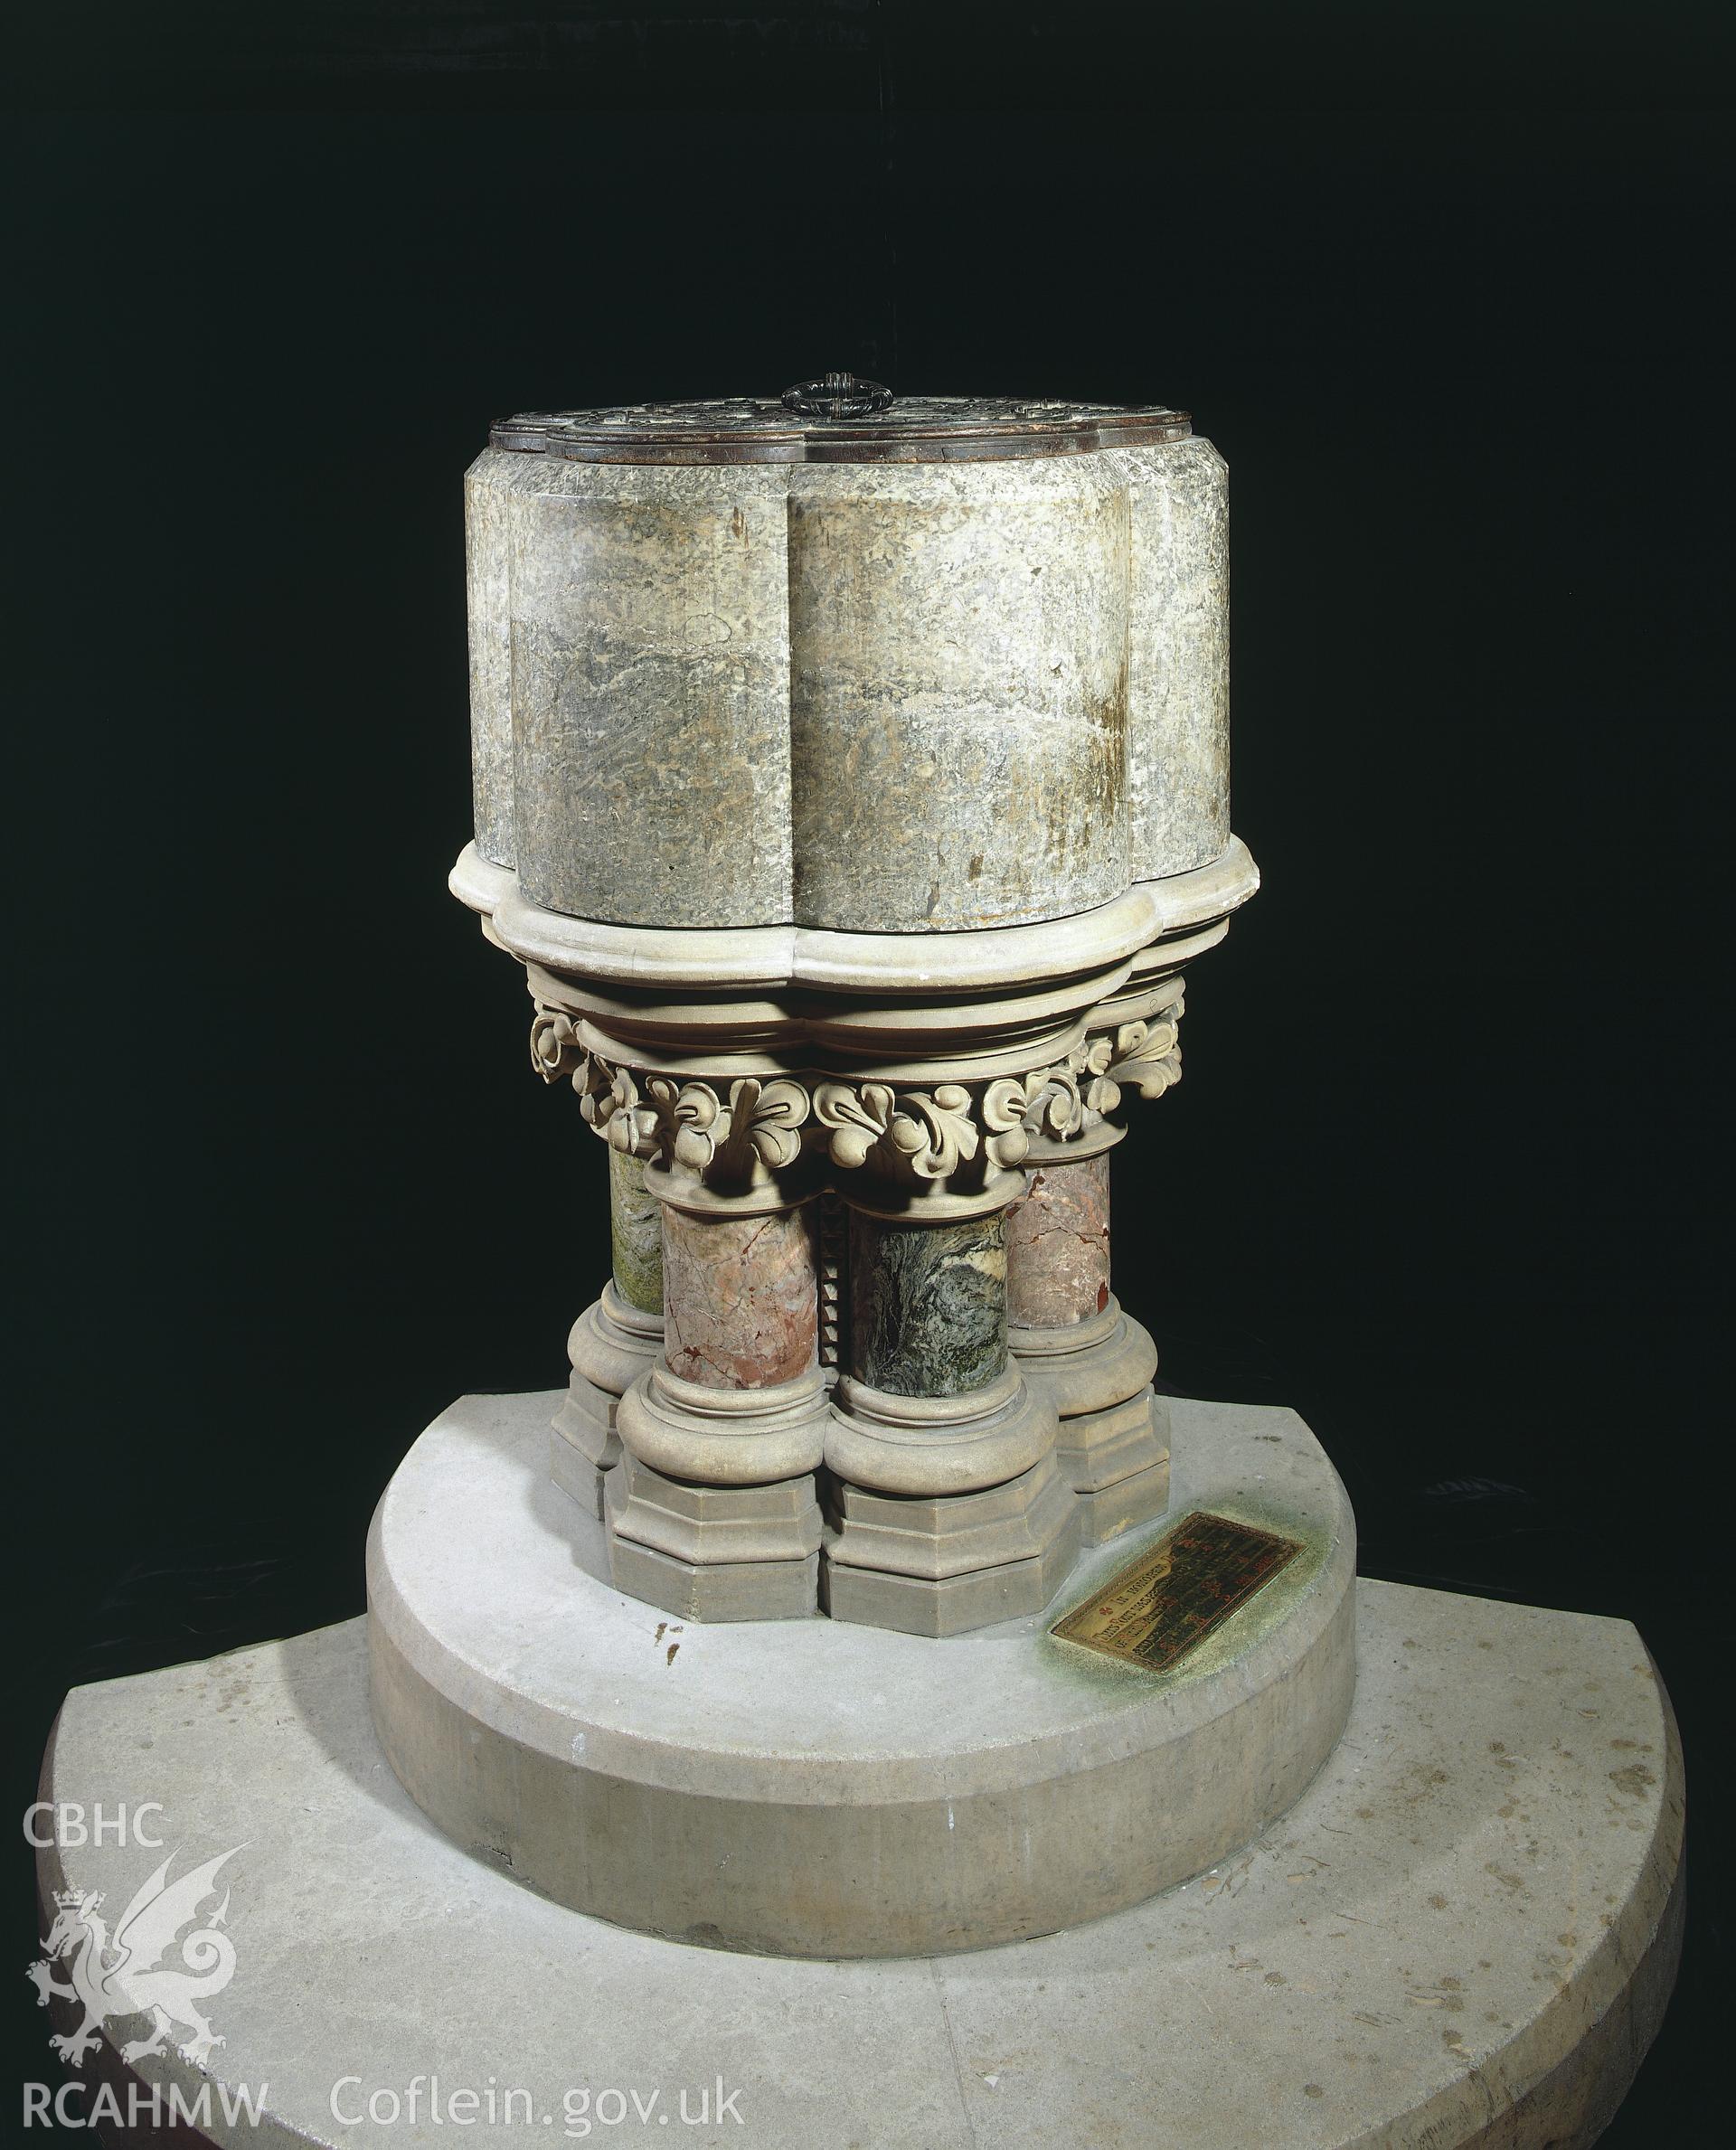 RCAHMW colour transparency showing view of the font at All Saints Church, Llanelli.